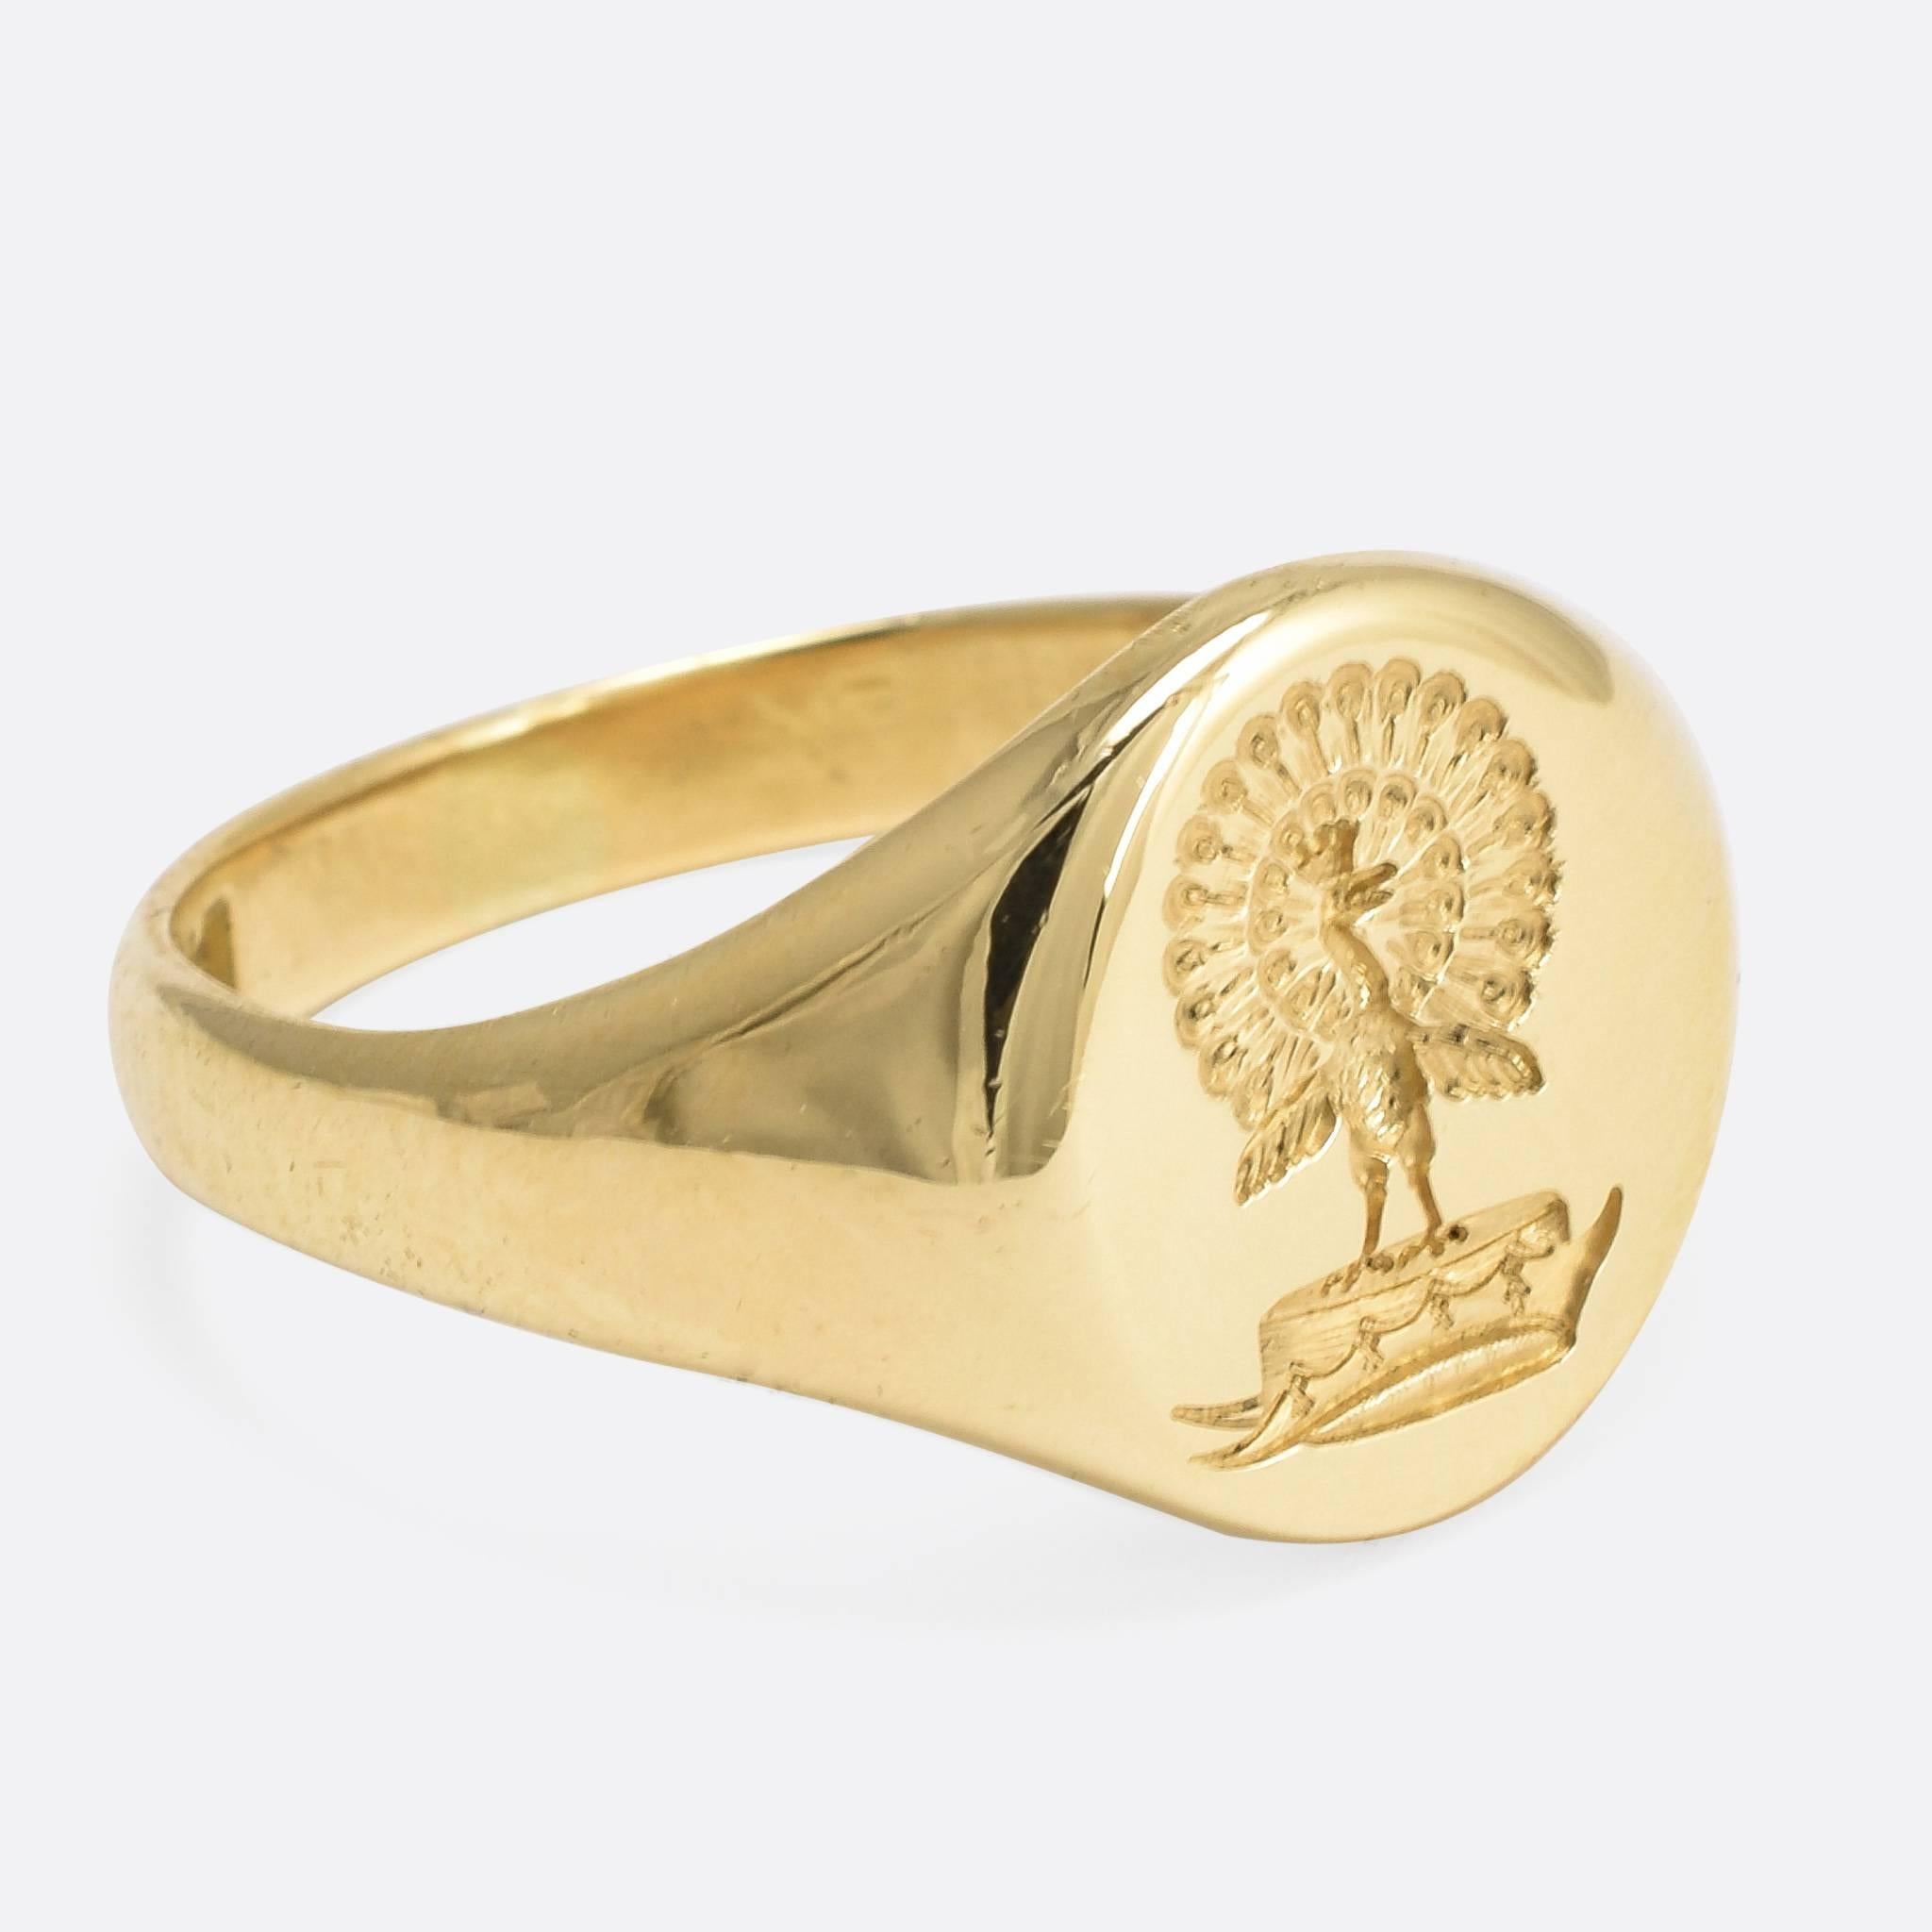 This superb vintage Signet Ring is carved with an intaglio crest belonging to the Denne, Roos and Manners families of Great Britain. Depicted is 